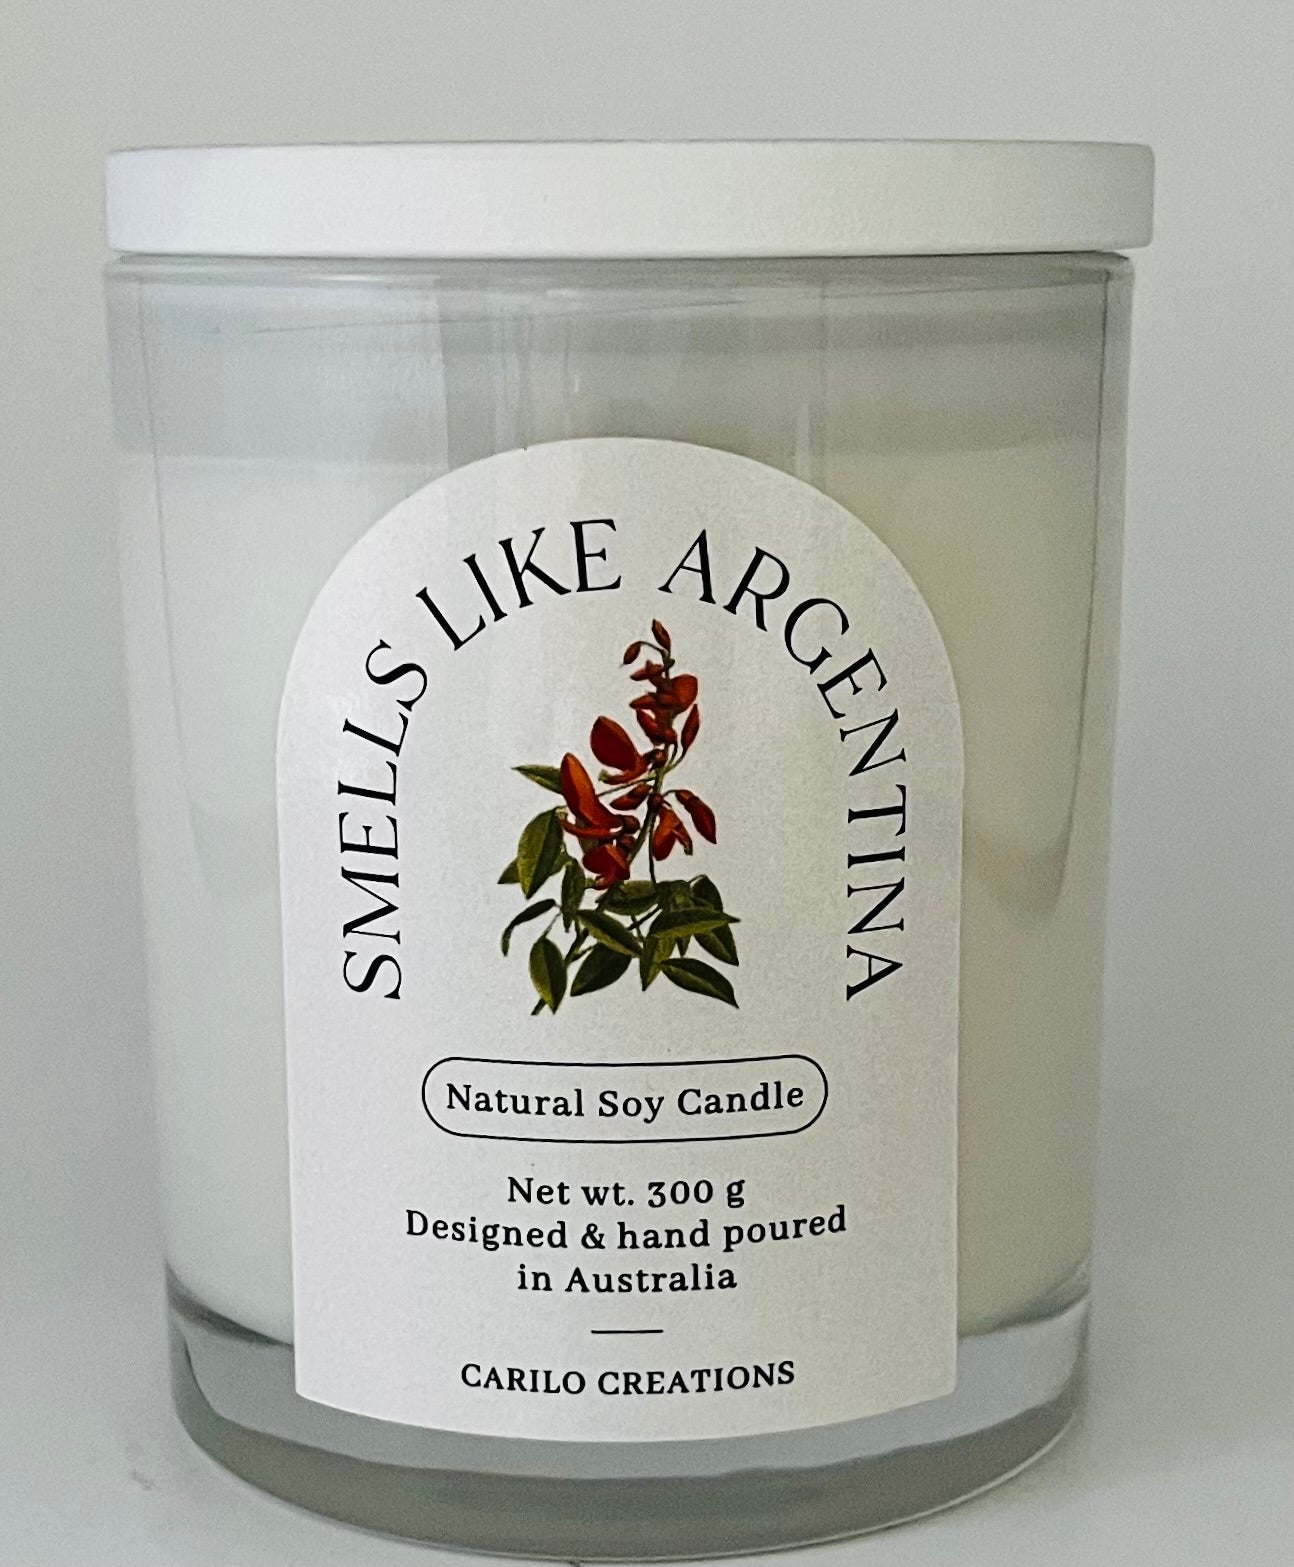 "SMELL LIKE ARGENTINA" SCENTED CANDLE- 300G